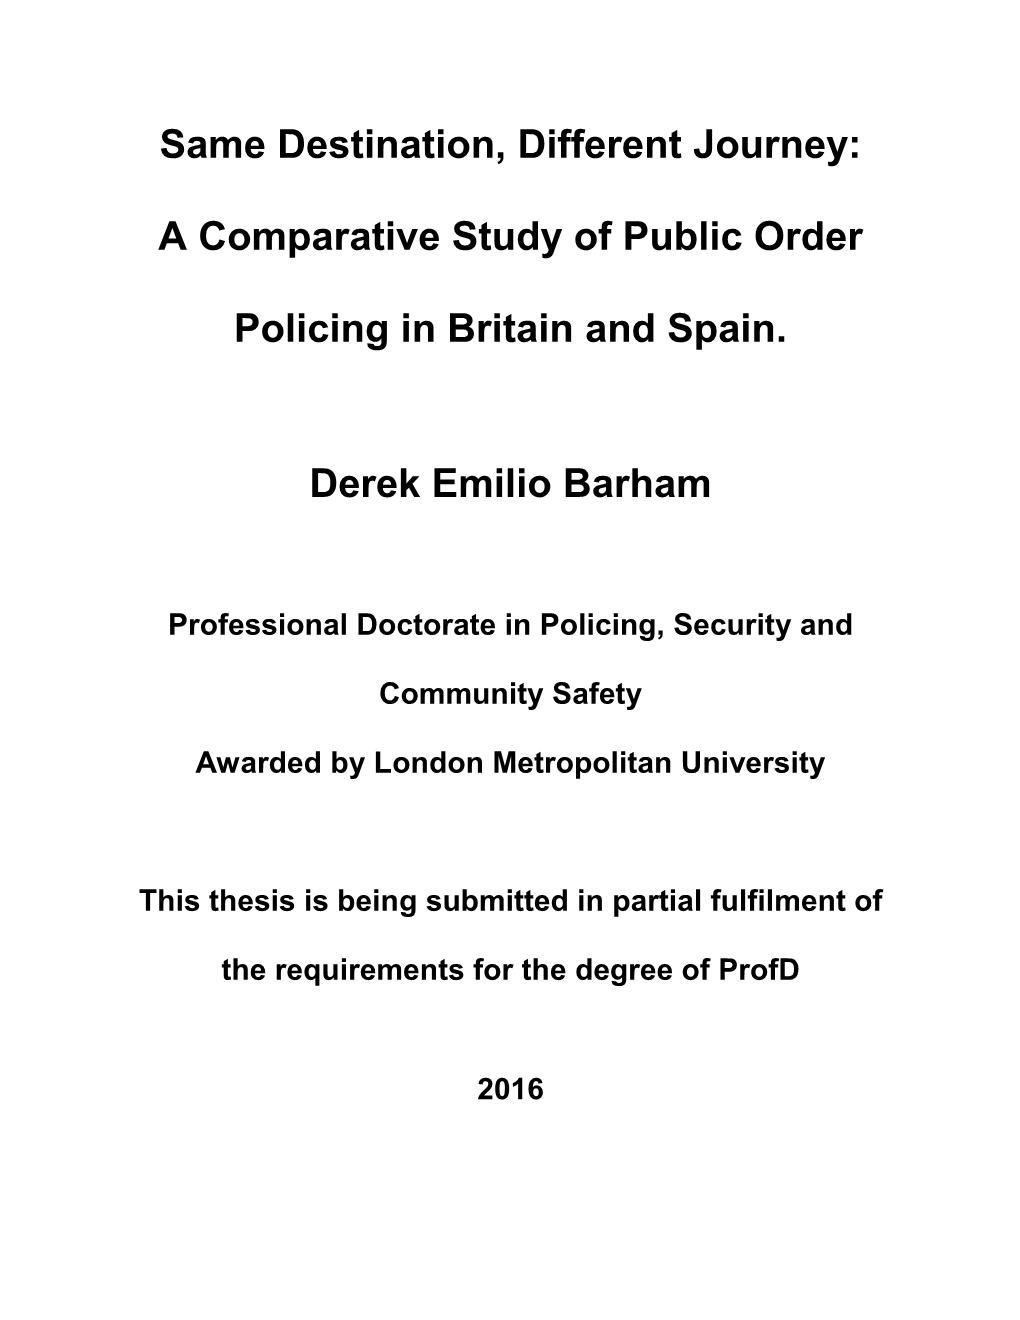 A Comparative Study of Public Order Policing In